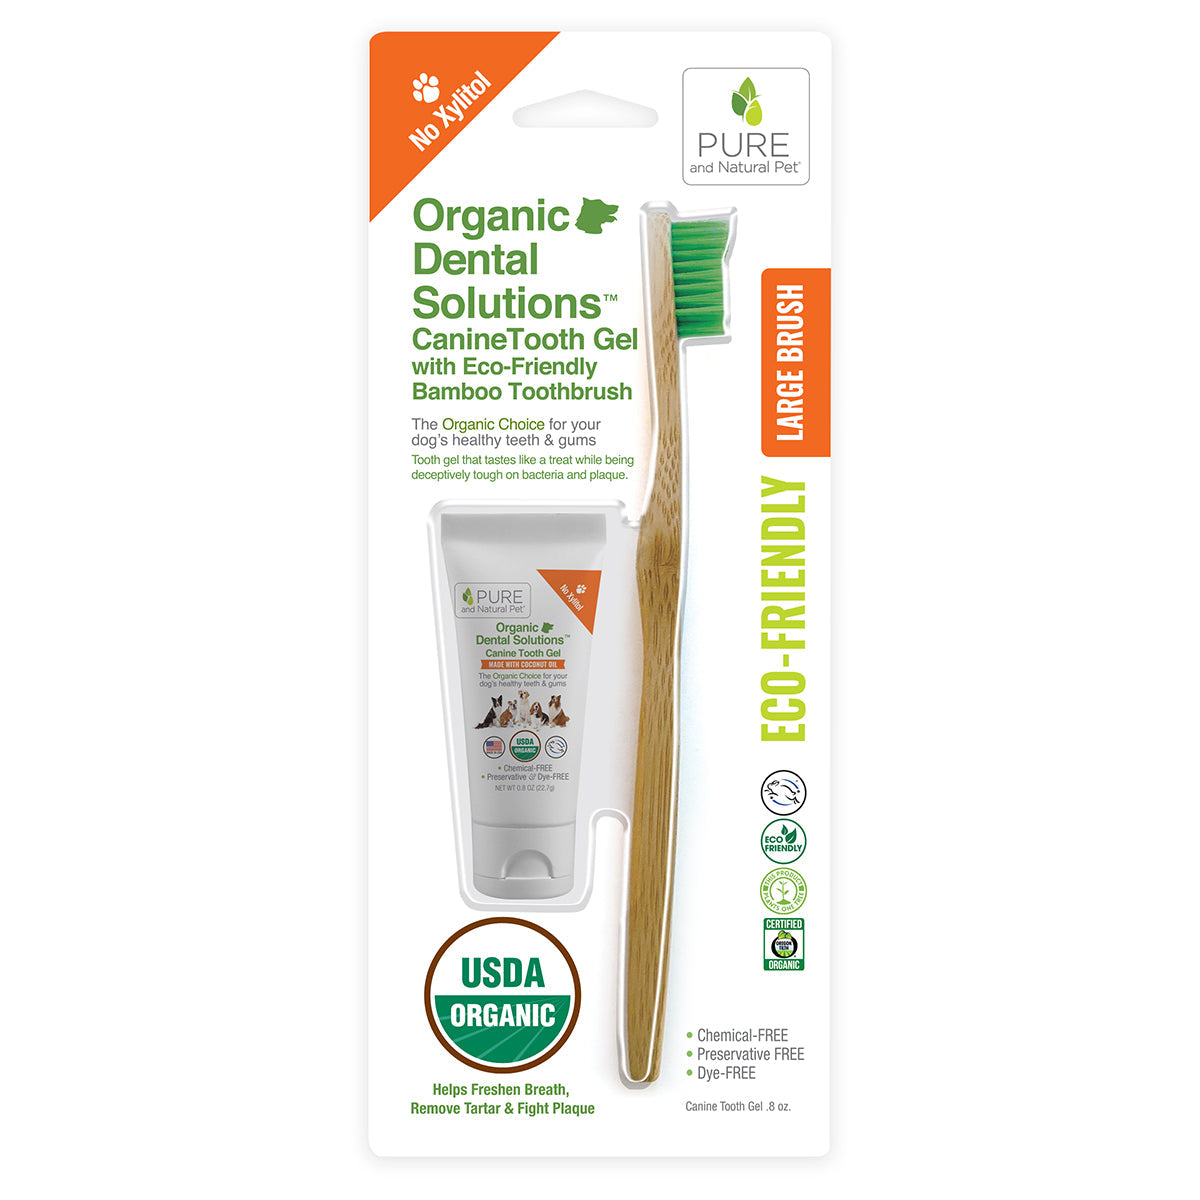 Bamboo Toothbrush & Canine Tooth Gel